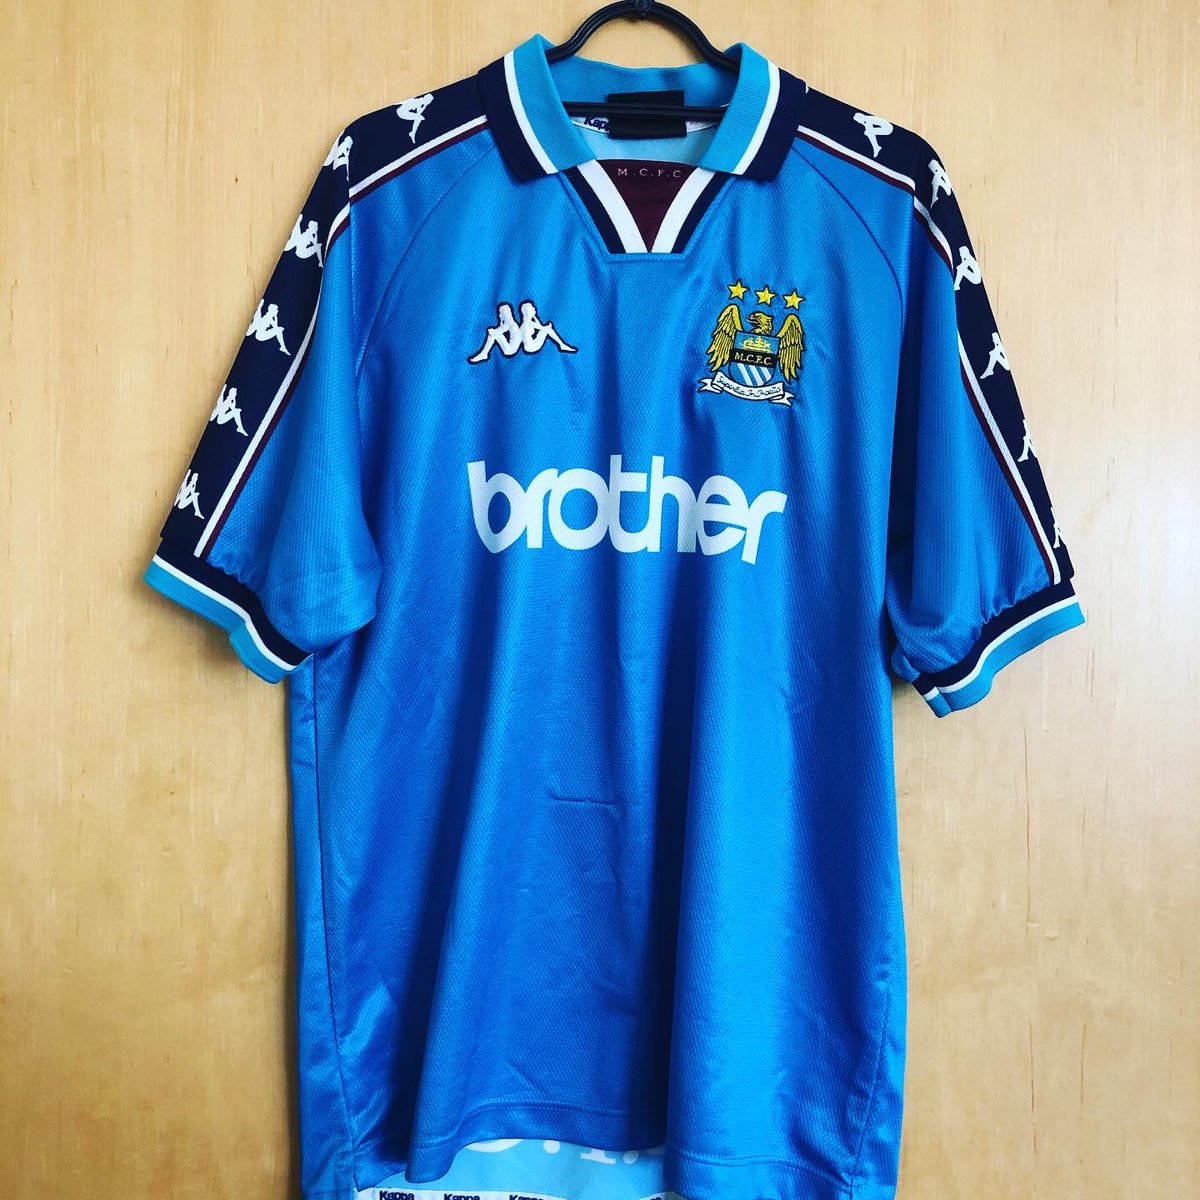 . @ManCity Home Kit, 1997-99 @Kappa_UKThere’s a lot of talk of a Oasis reunion these days. So I though I’d wear a Man City shirt from the 90s, in some sort of propitiatory rite. My Man Utd supporting colleague  @MatthewEvenson wasn’t happy when he saw it in our morning team call